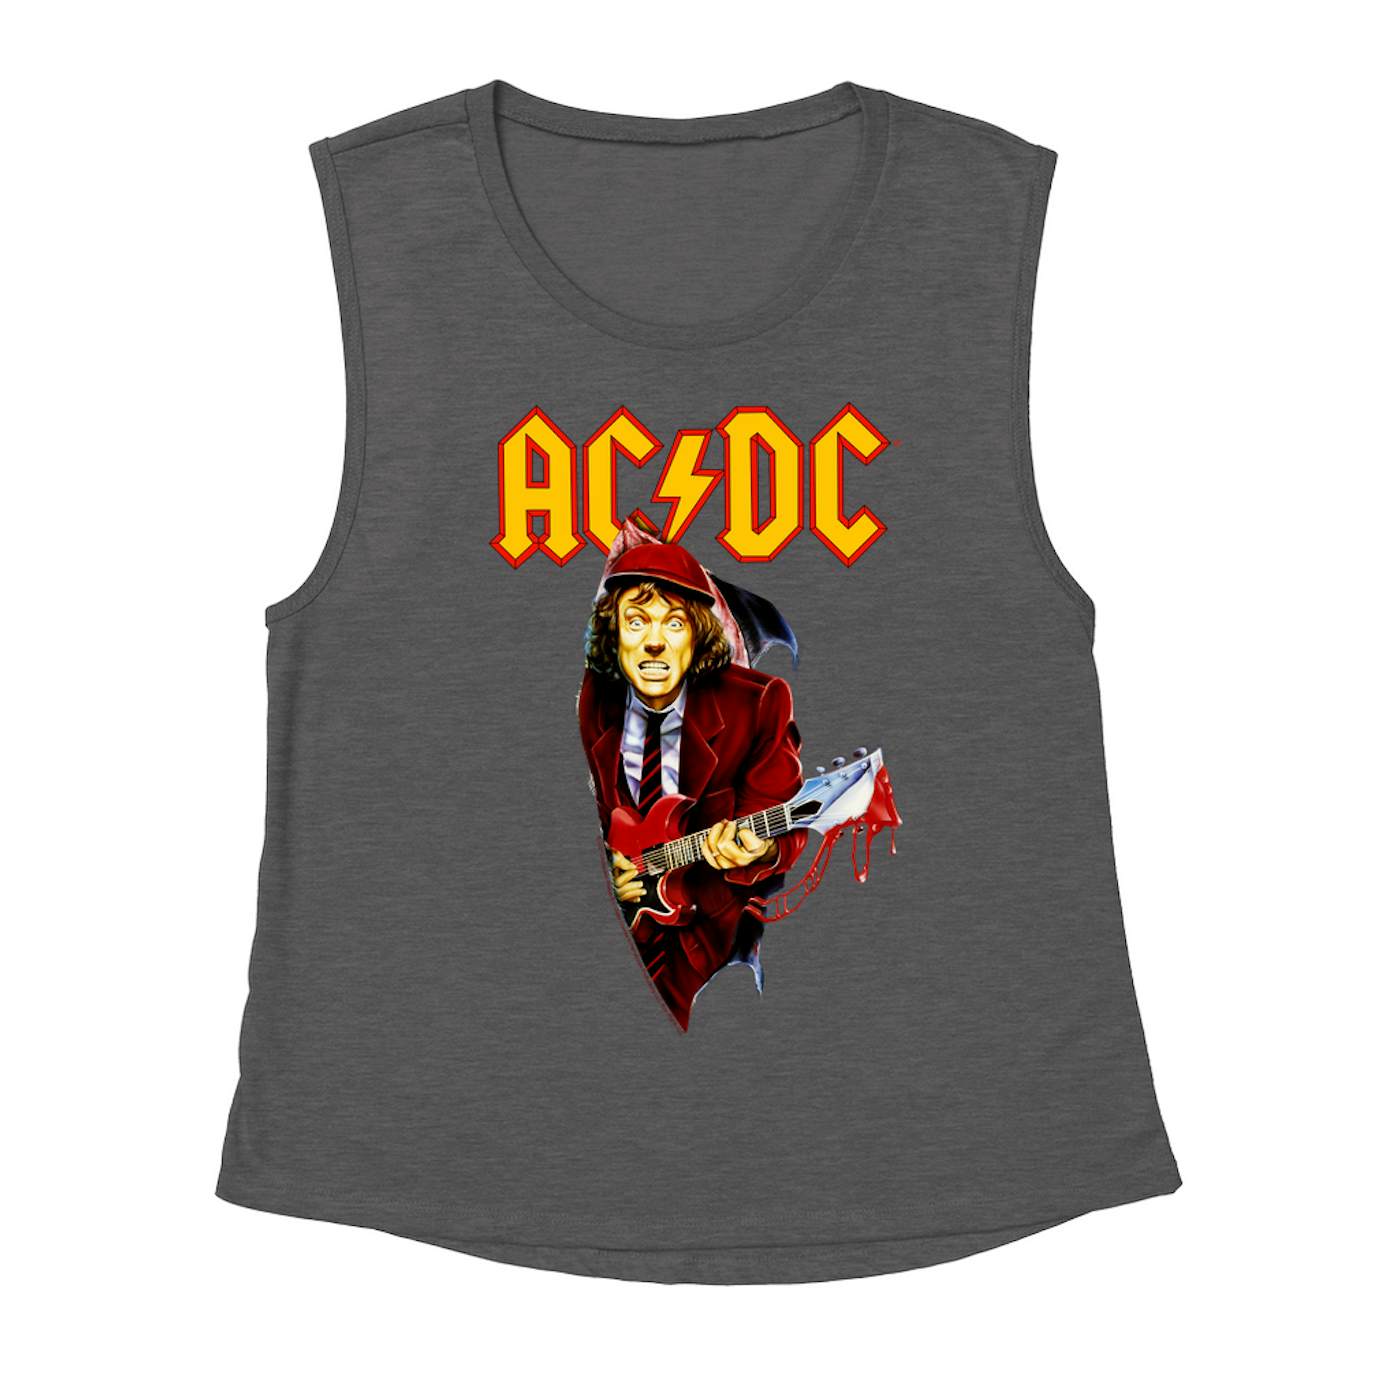 AC/DC Ladies' Muscle Tank Top | Angus Young With Bloody Guitar Design ACDC Shirt